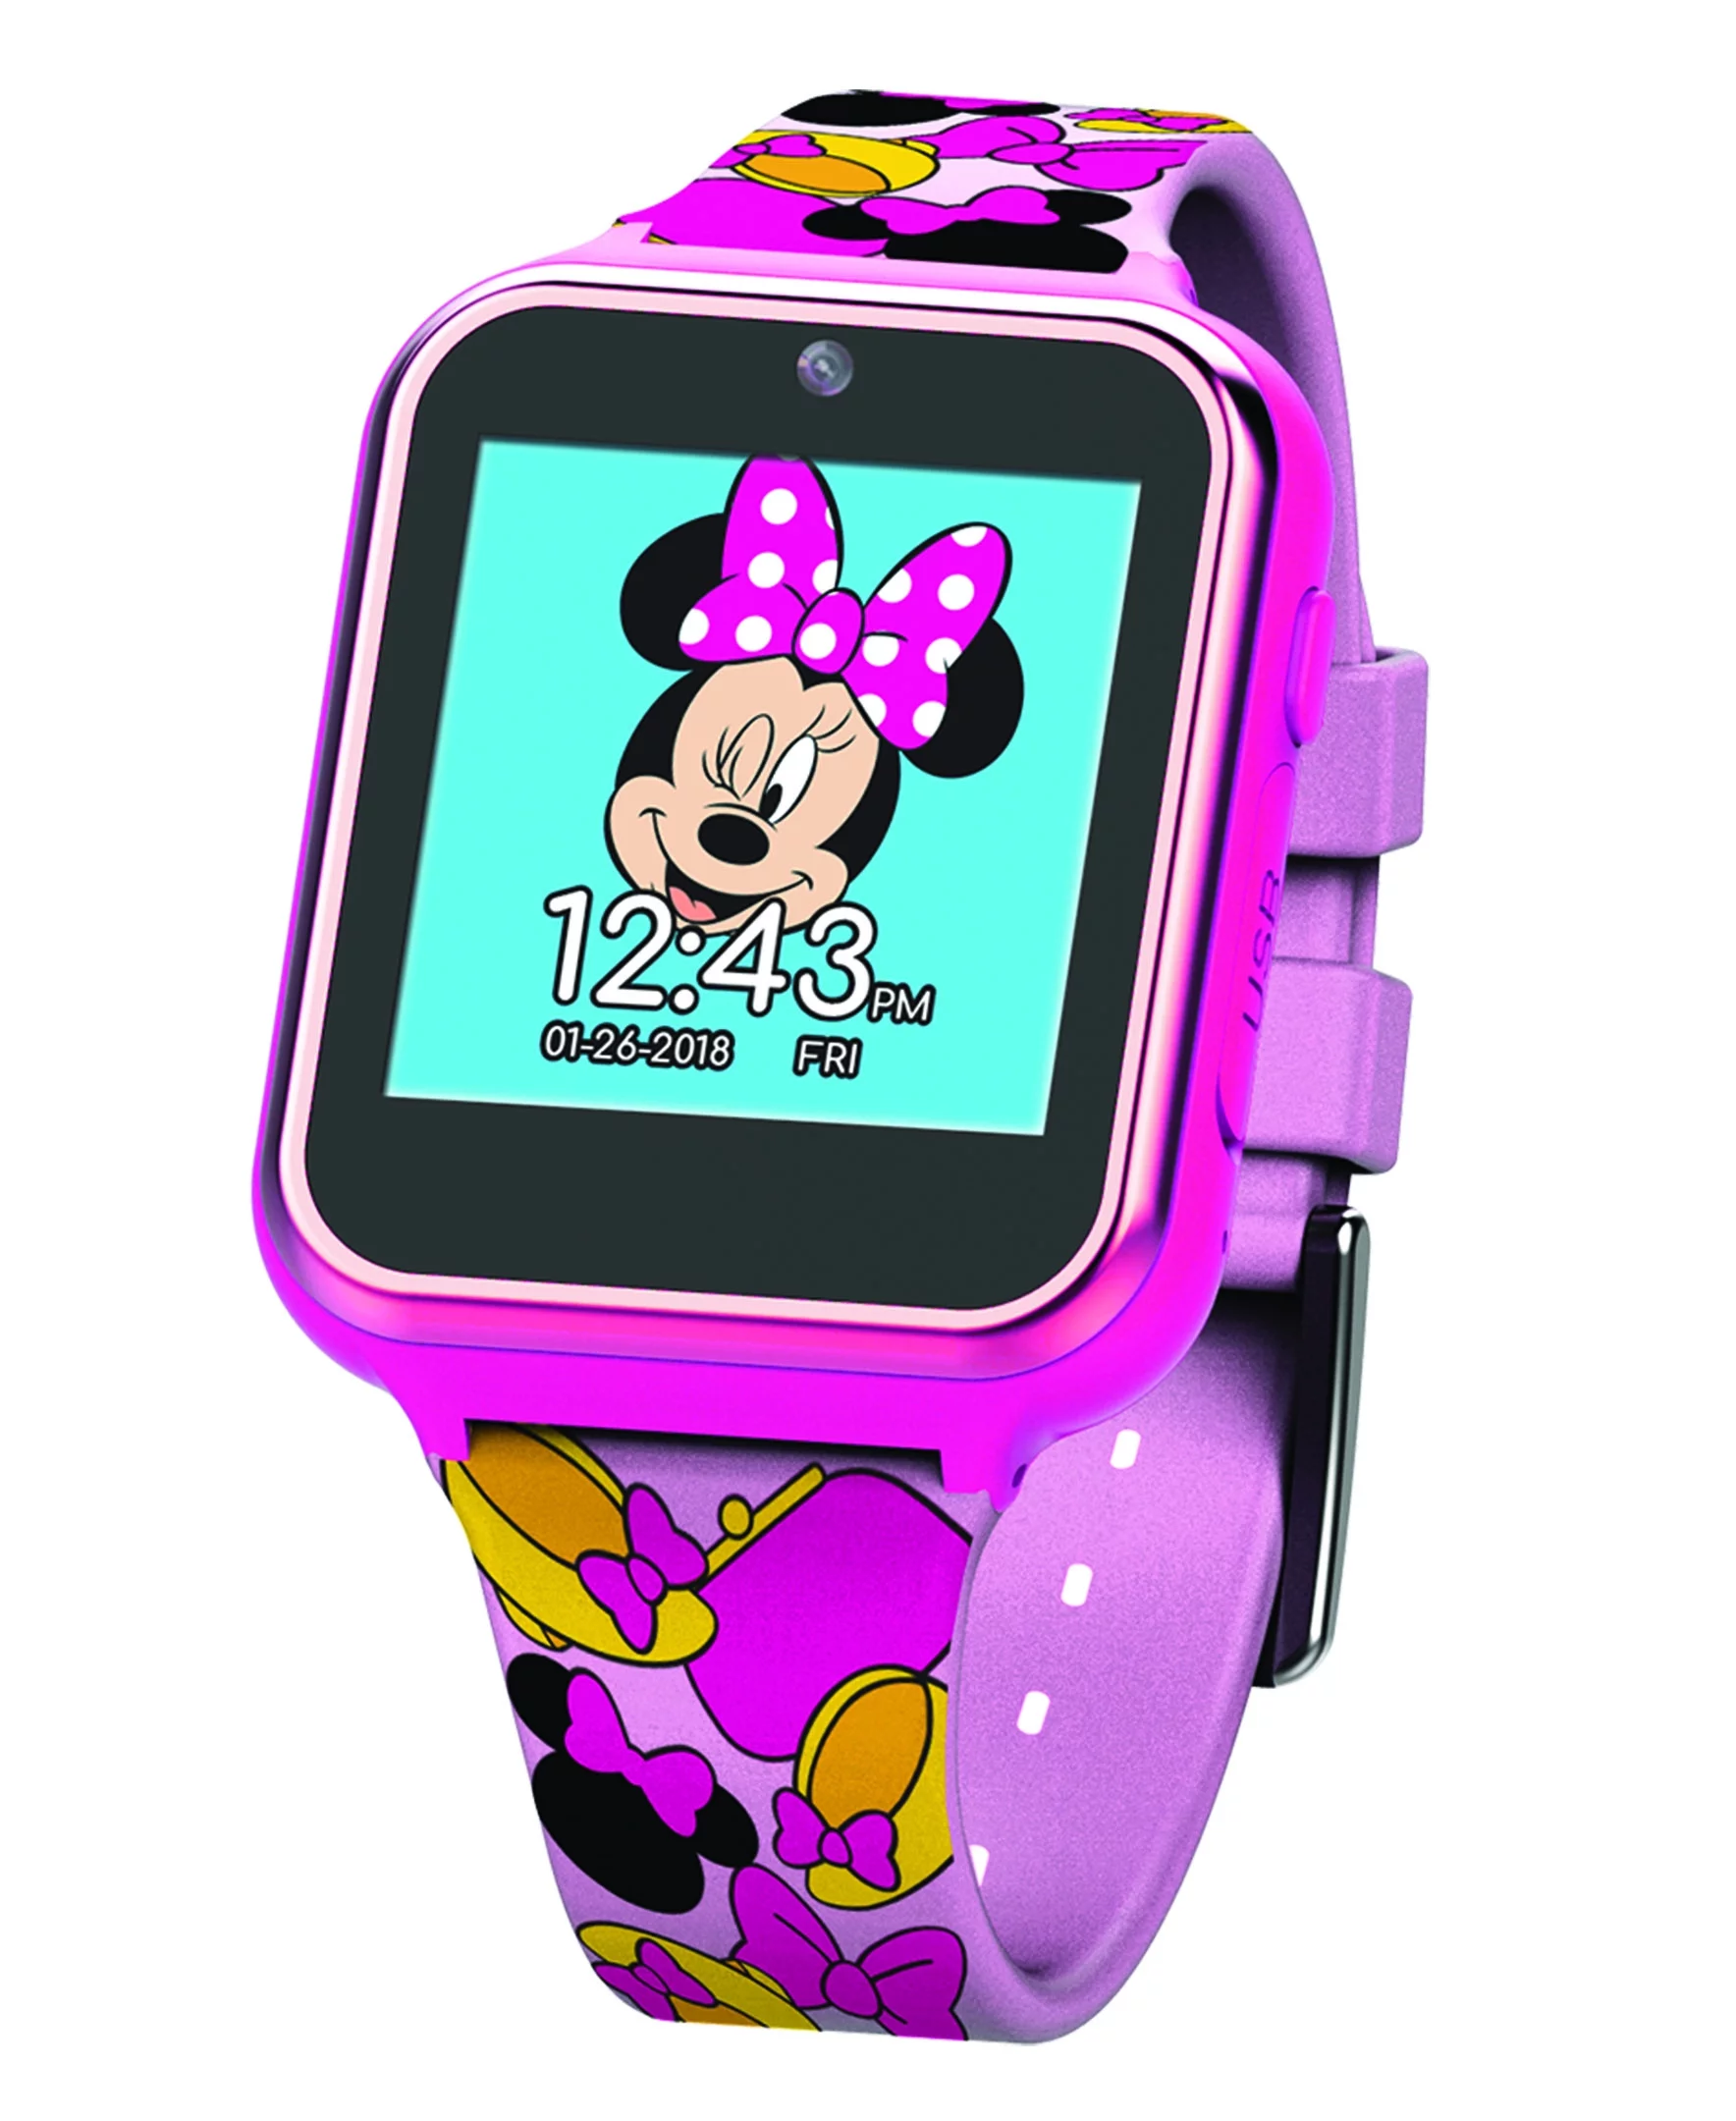 Minnie Mouse Disney iTime Interactive Kids Smart Watch 40 mm in Pink - Model No. MN4116